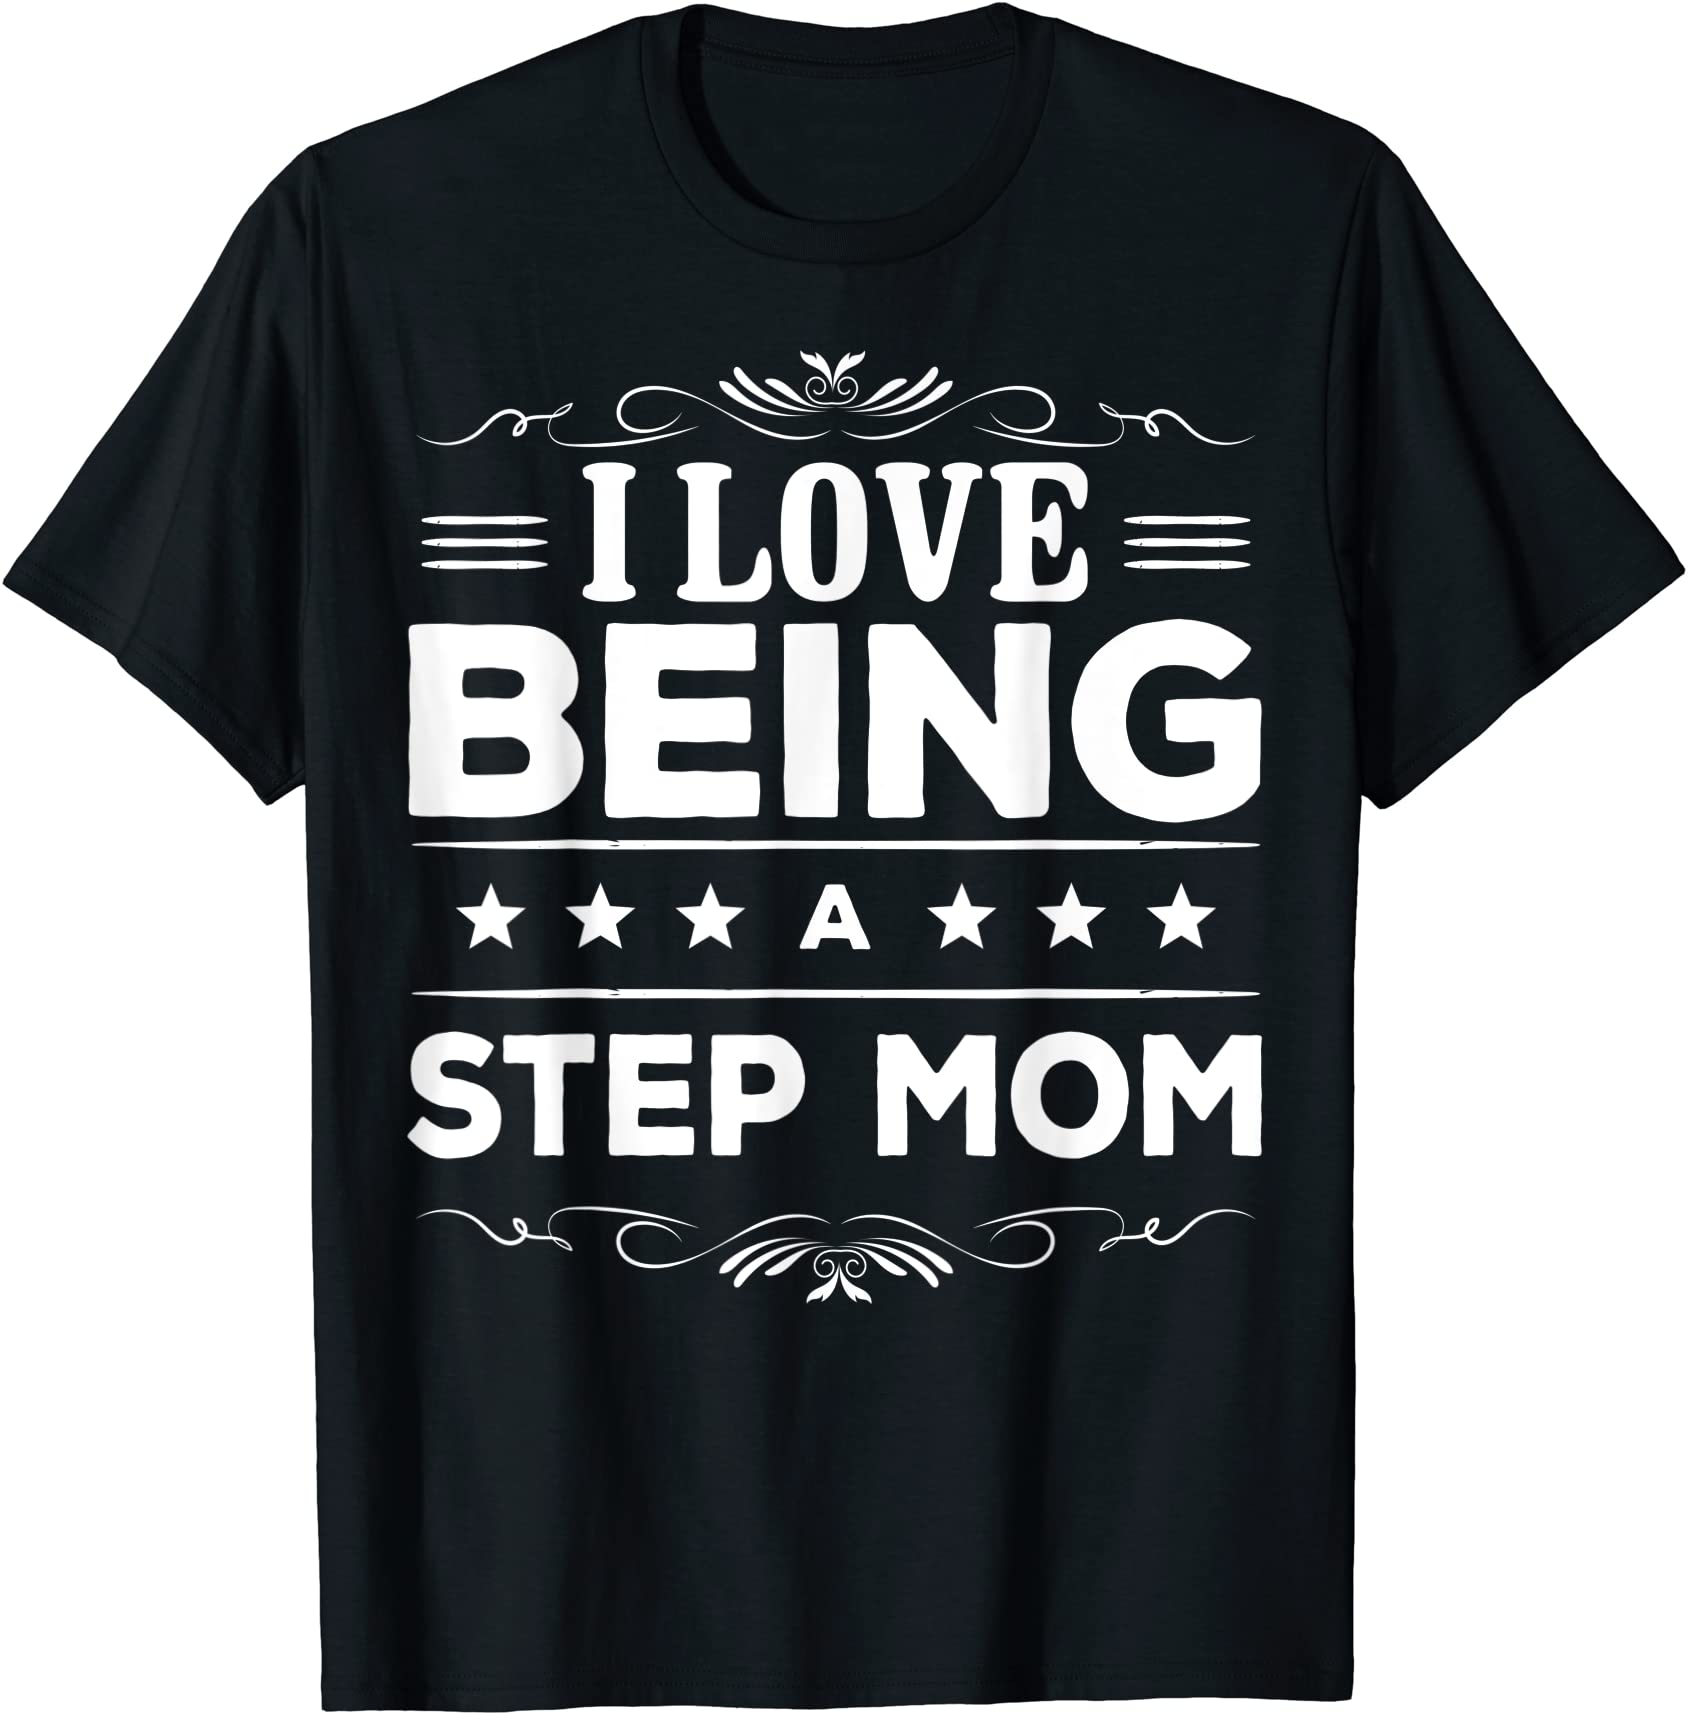 I Love Being A Step Mom T For Step Mom T Shirt Men Buy T Shirt Designs